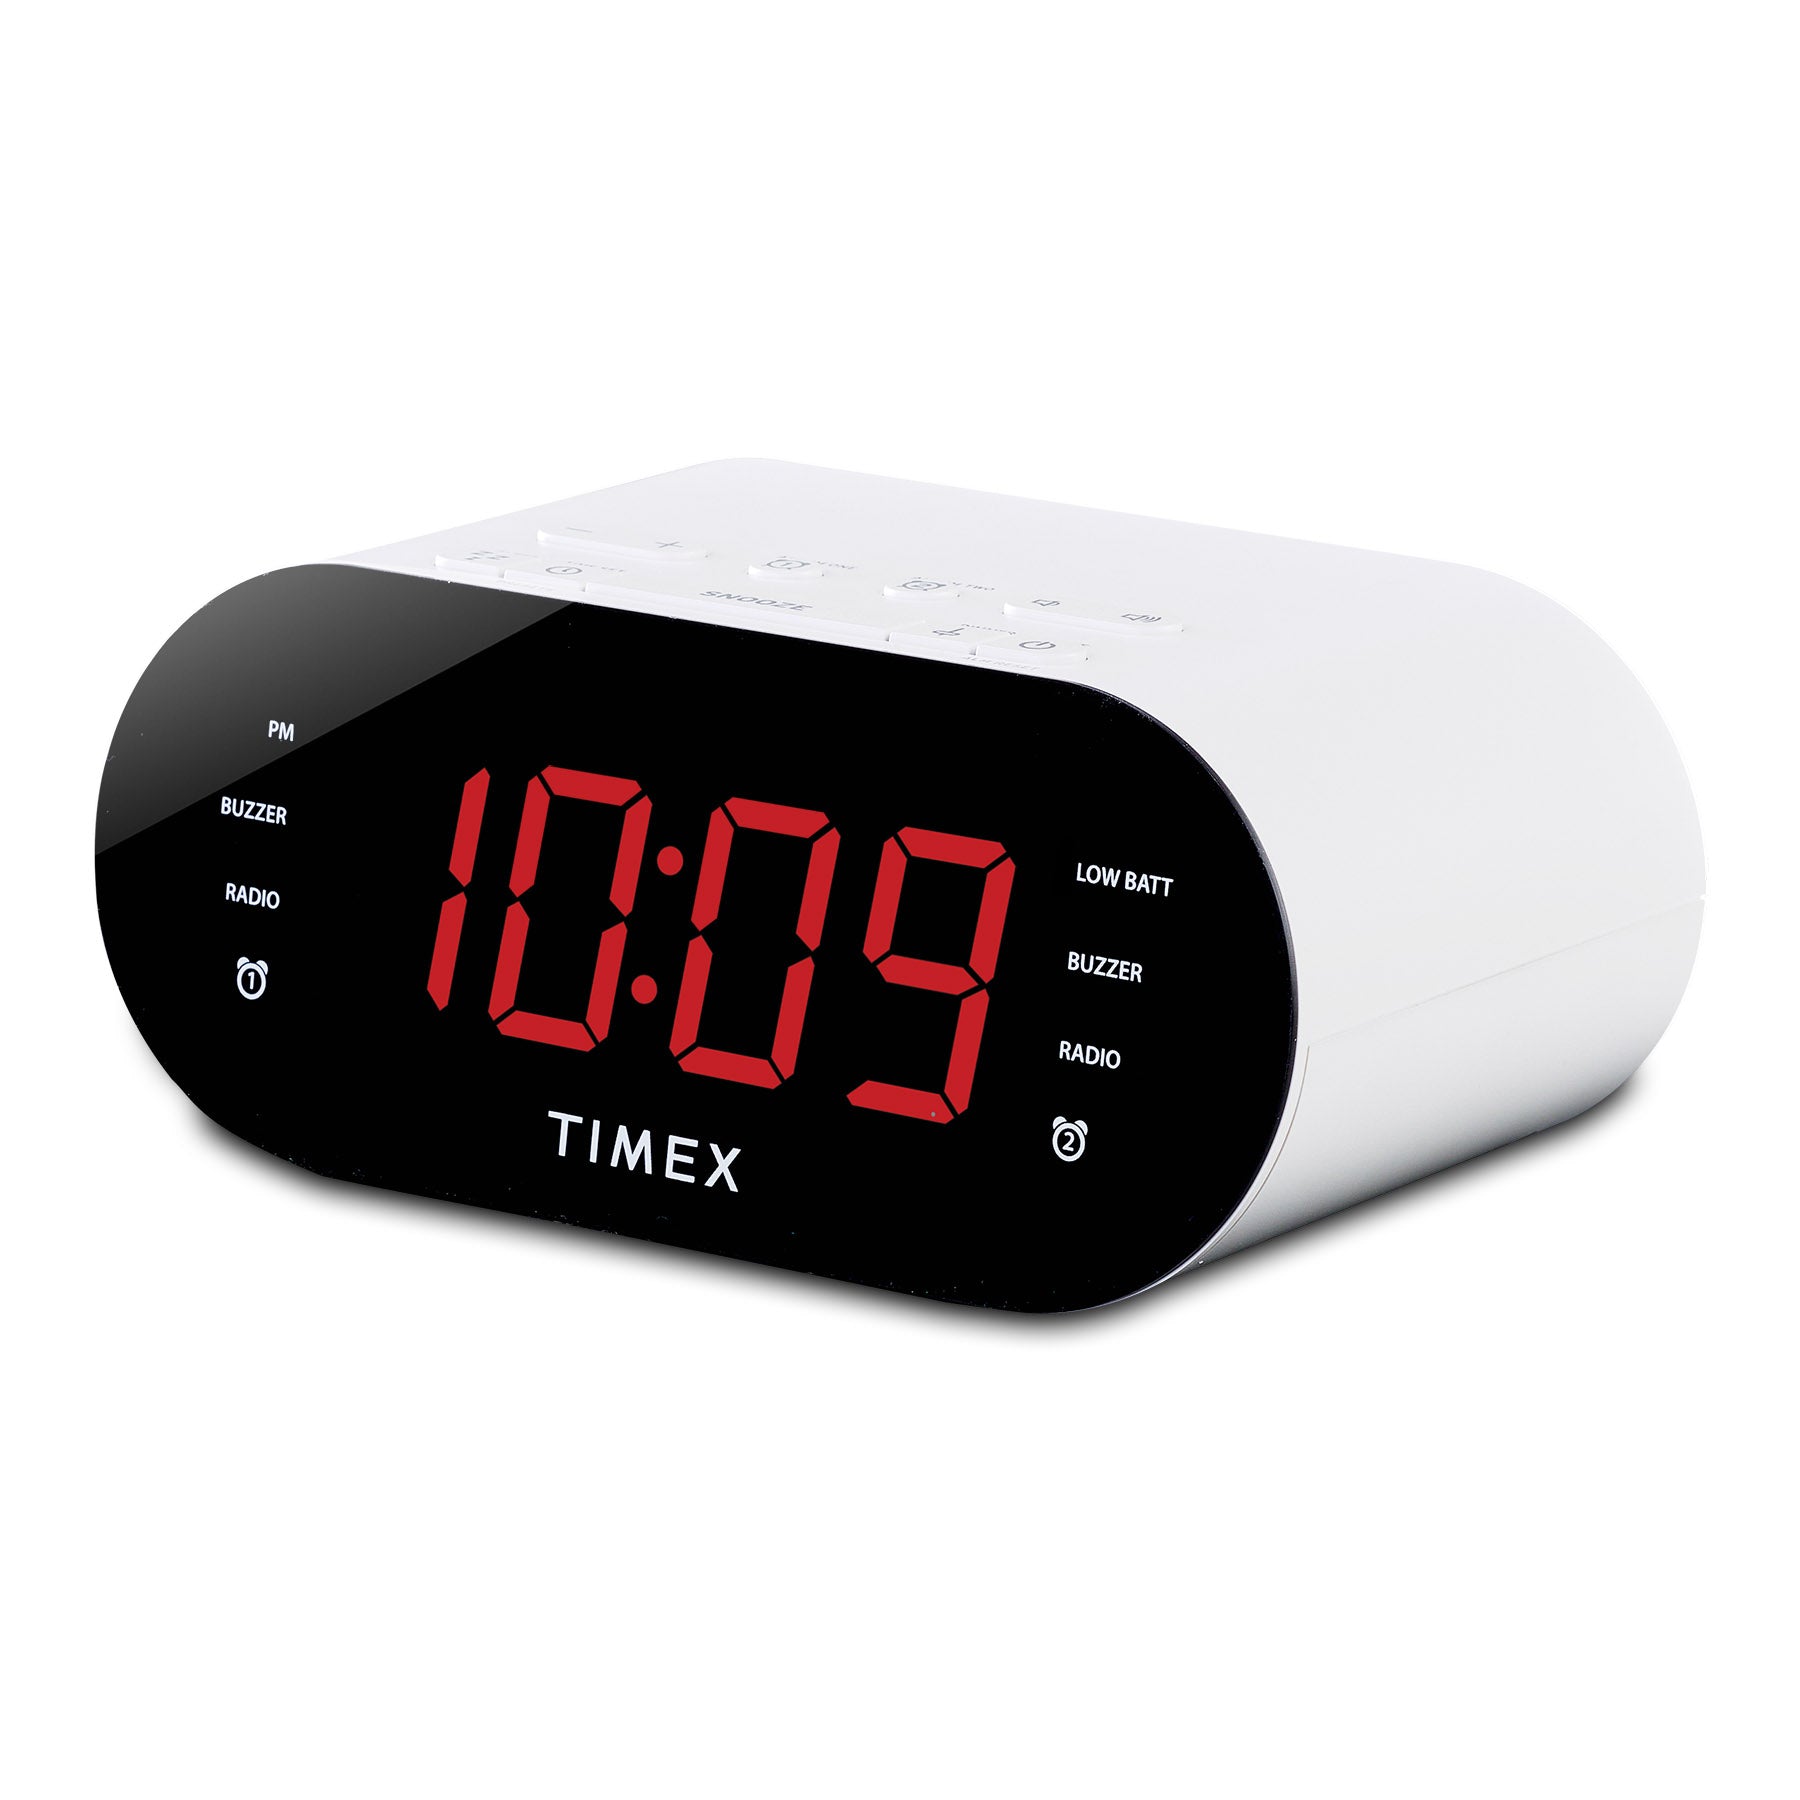 Timex Alarm Clock for Bedroom with AM/FM Radio and 20 Station Presets – White (T231W)